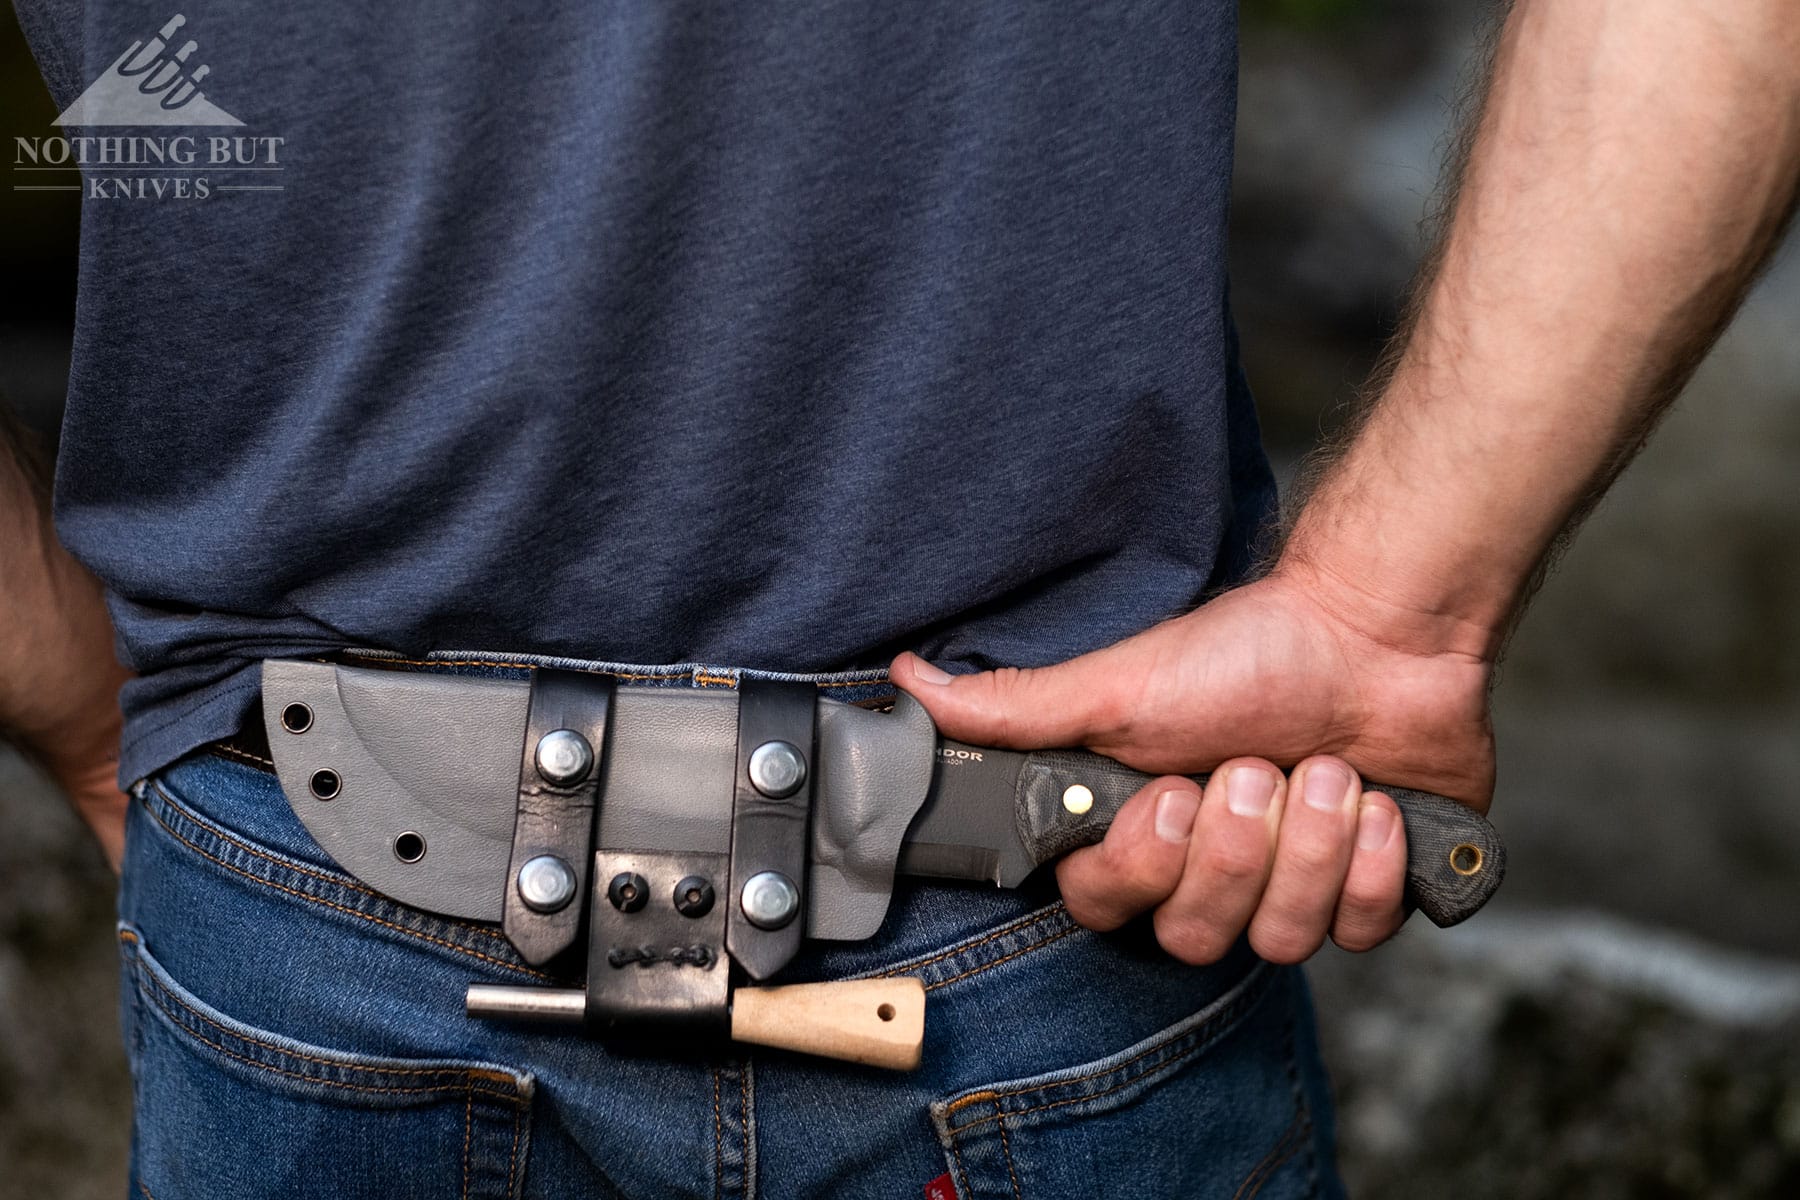 The Condor SBK in the scout carry position on a person's waist.